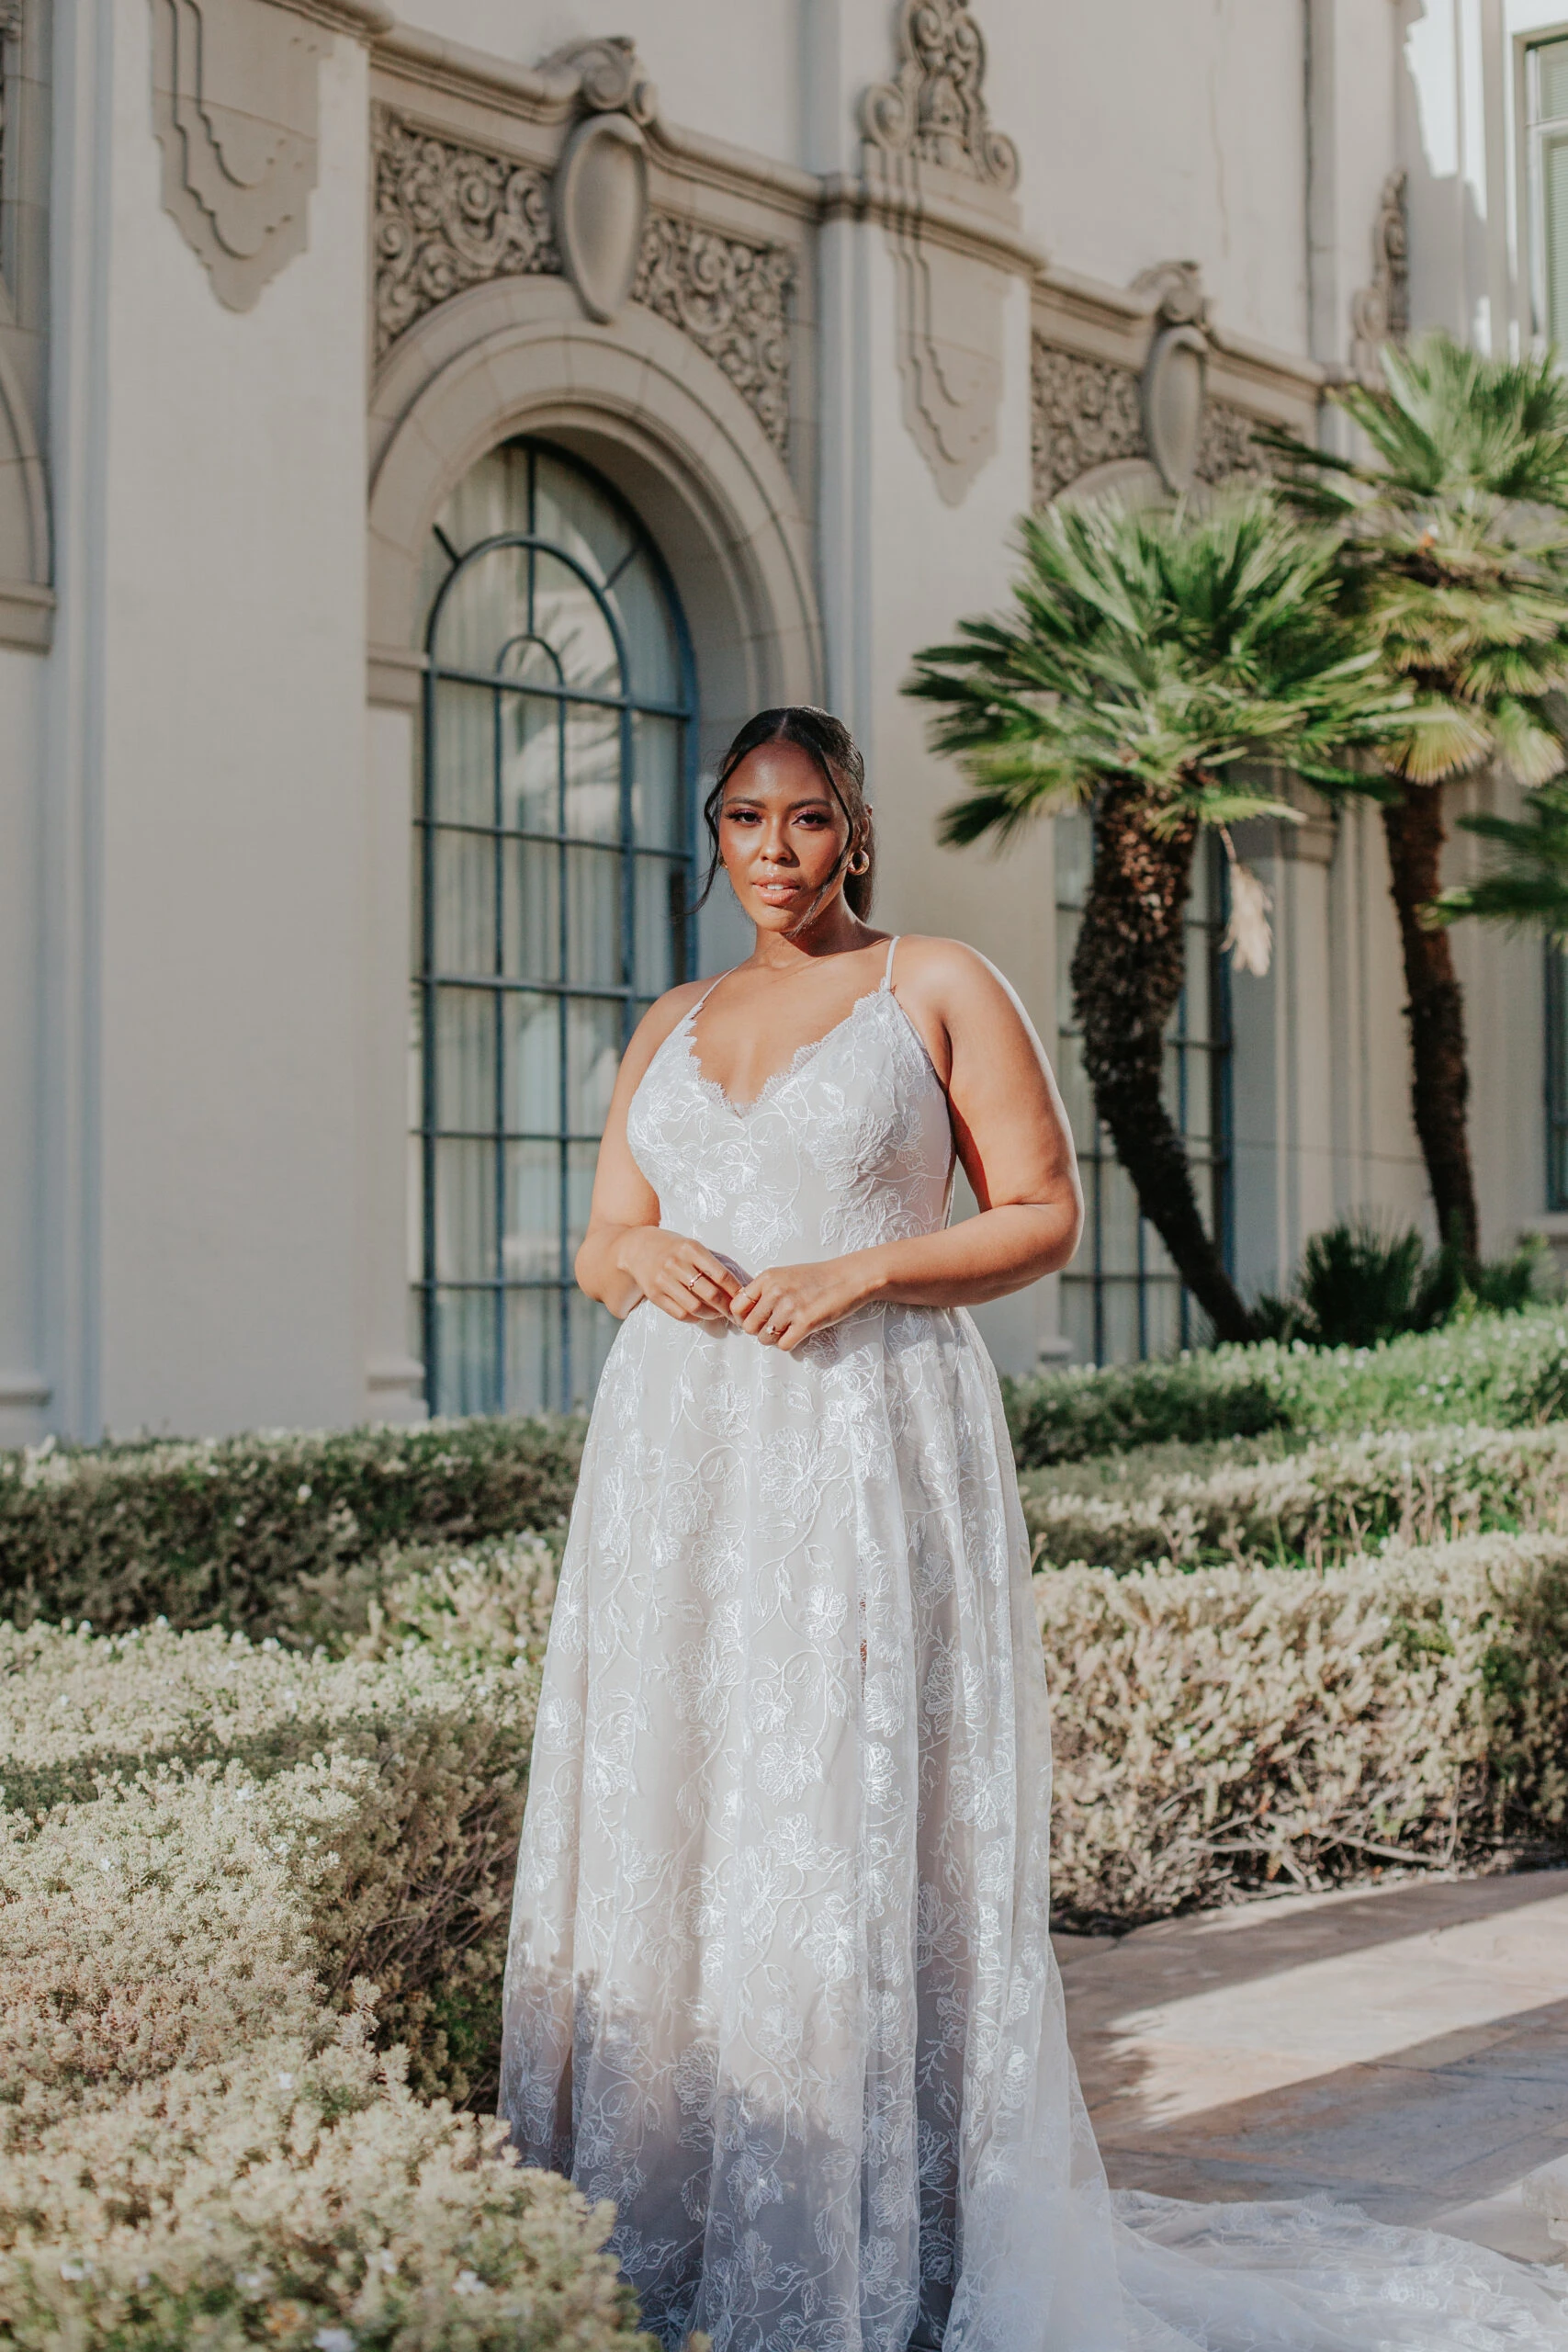 plus size lace wedding dress with spaghetti straps - luna+ by All Who Wander